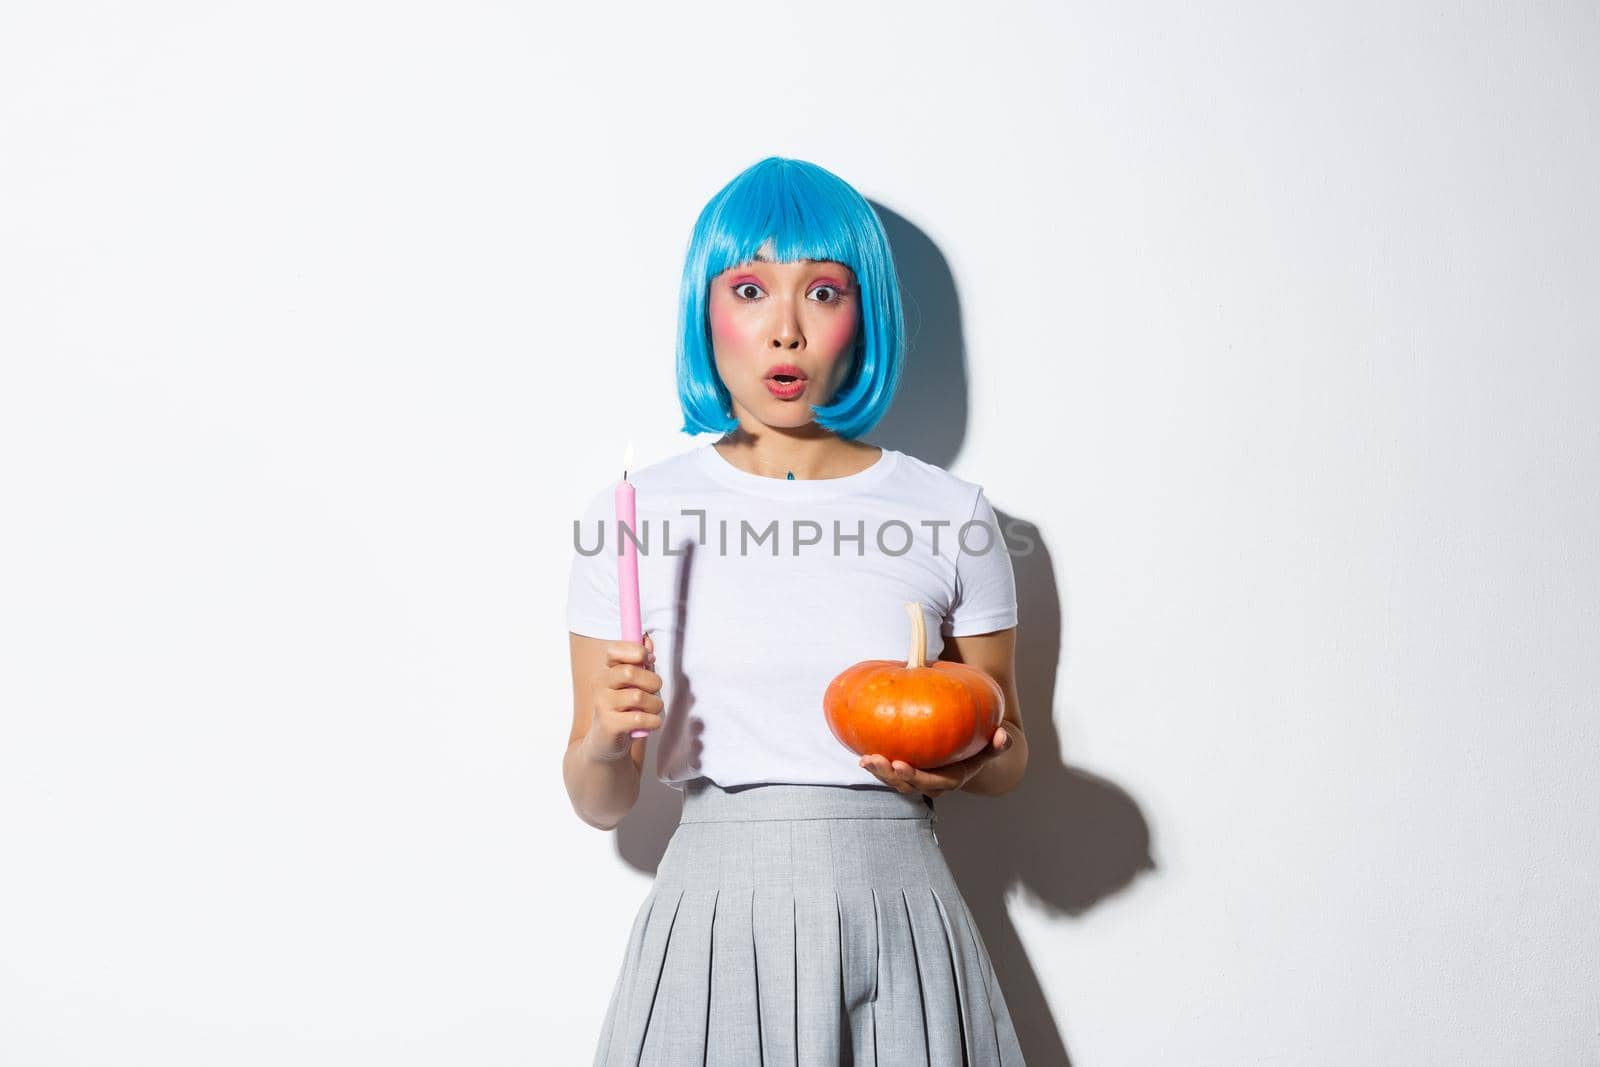 Concept of halloween. Portrait of surprised asian female holding pumpkin and candle, wearing blue wig, gasping amazed as standing over white background.